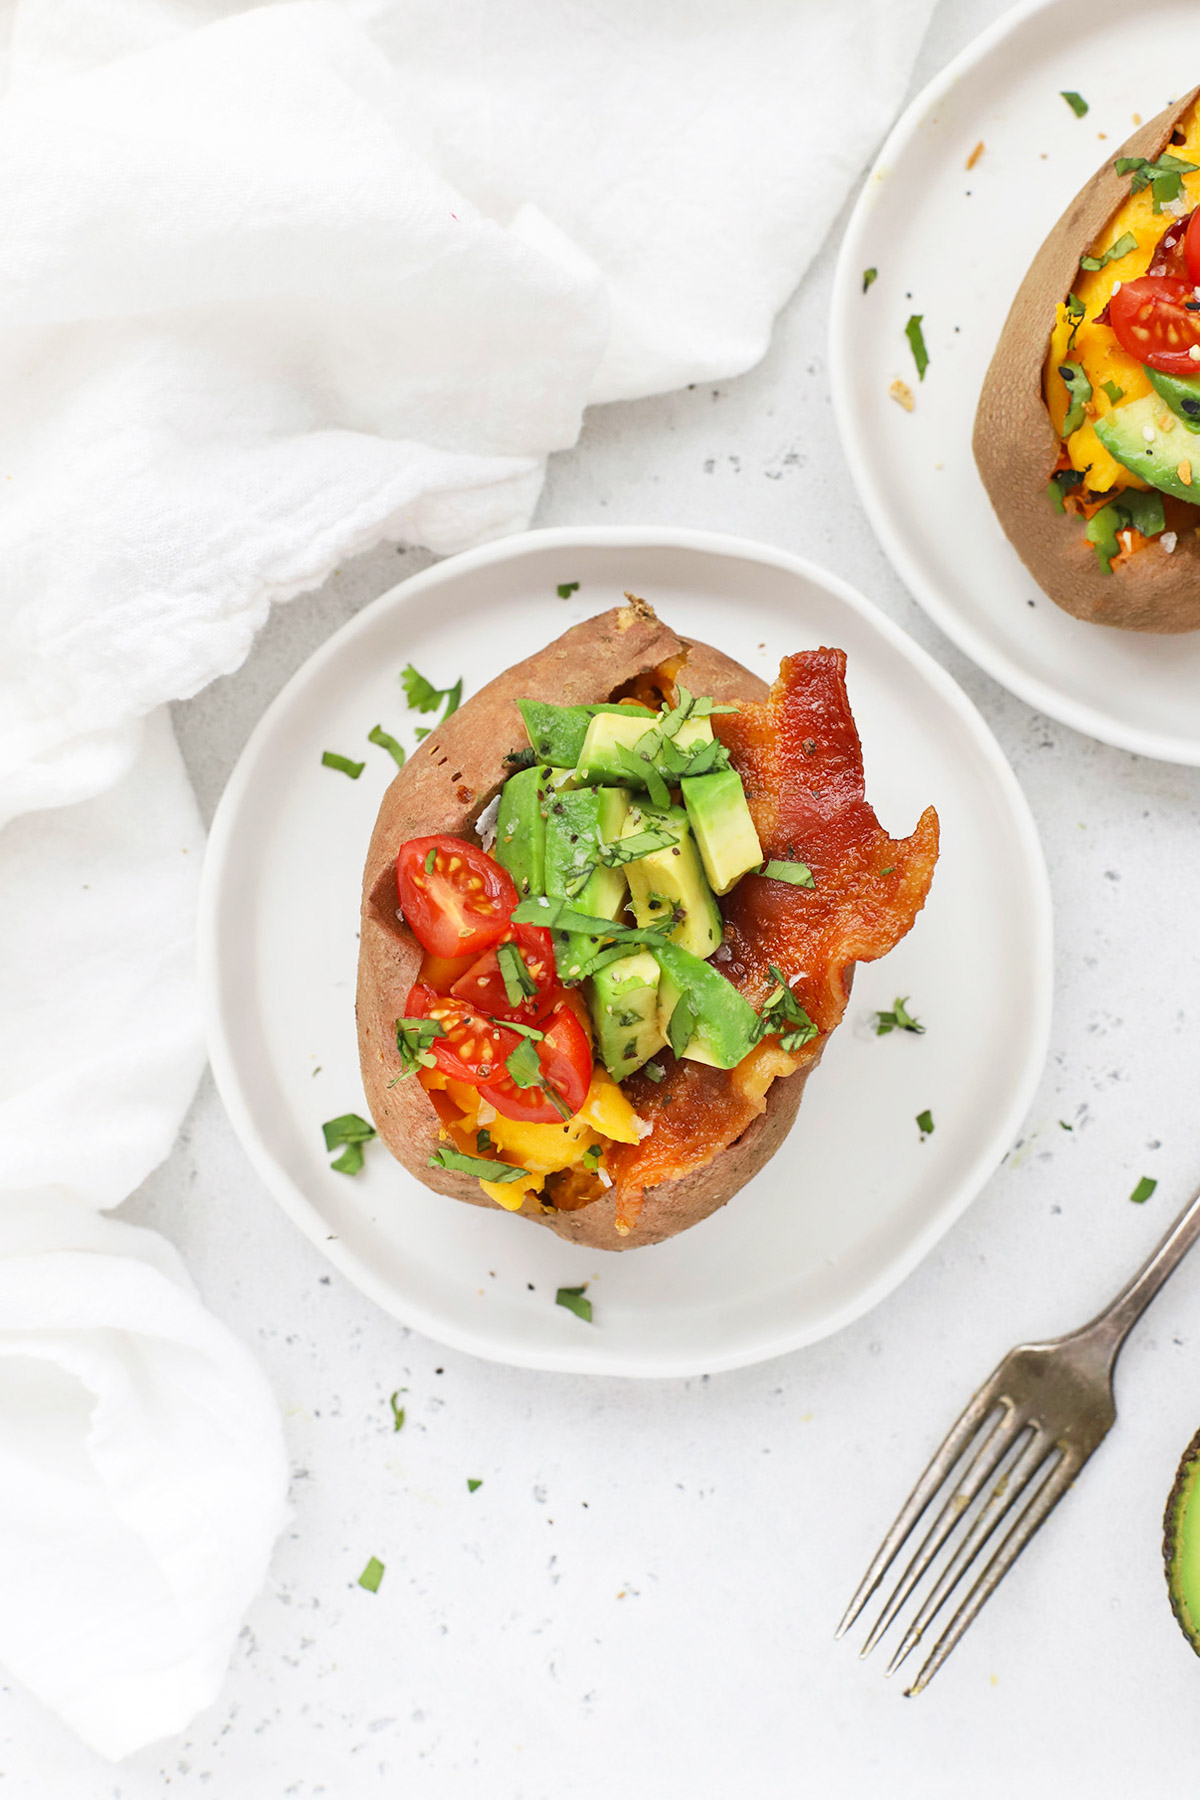 Overhead view of a California Breakfast Sweet Potato topped with bacon, eggs, avocado, and tomatoes.